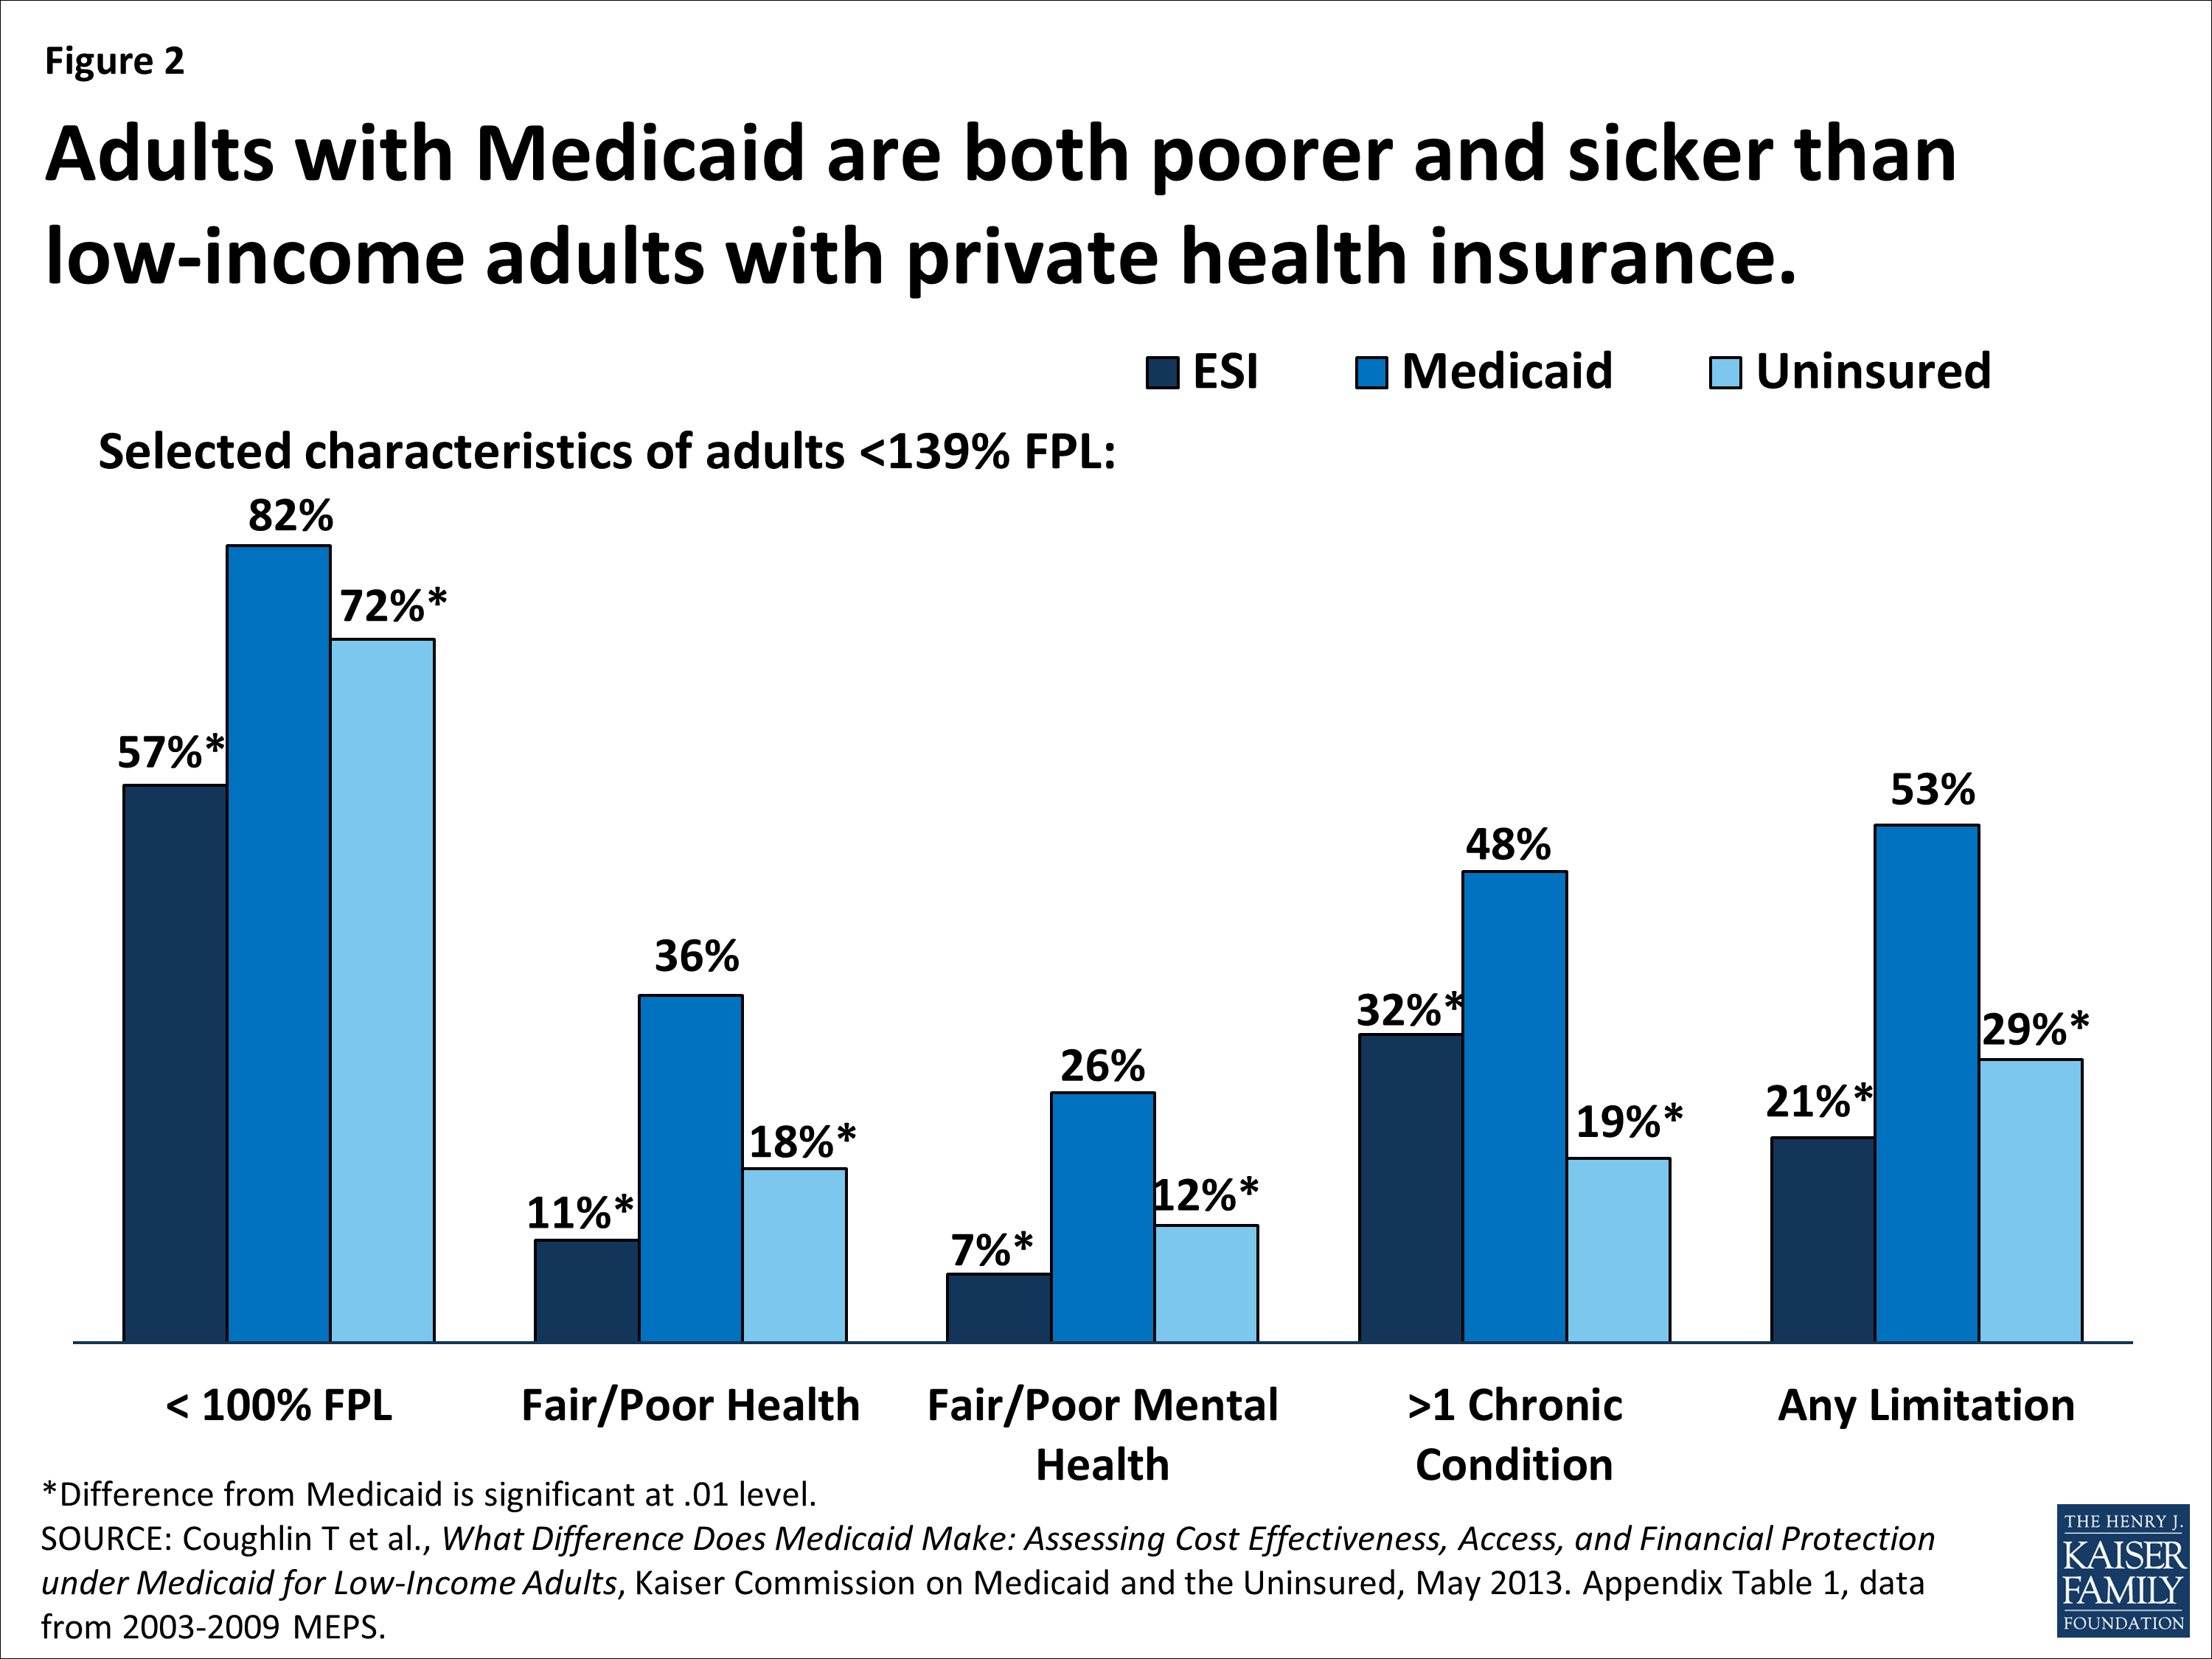 What is Medicaid’s Impact on Access to Care, Health and